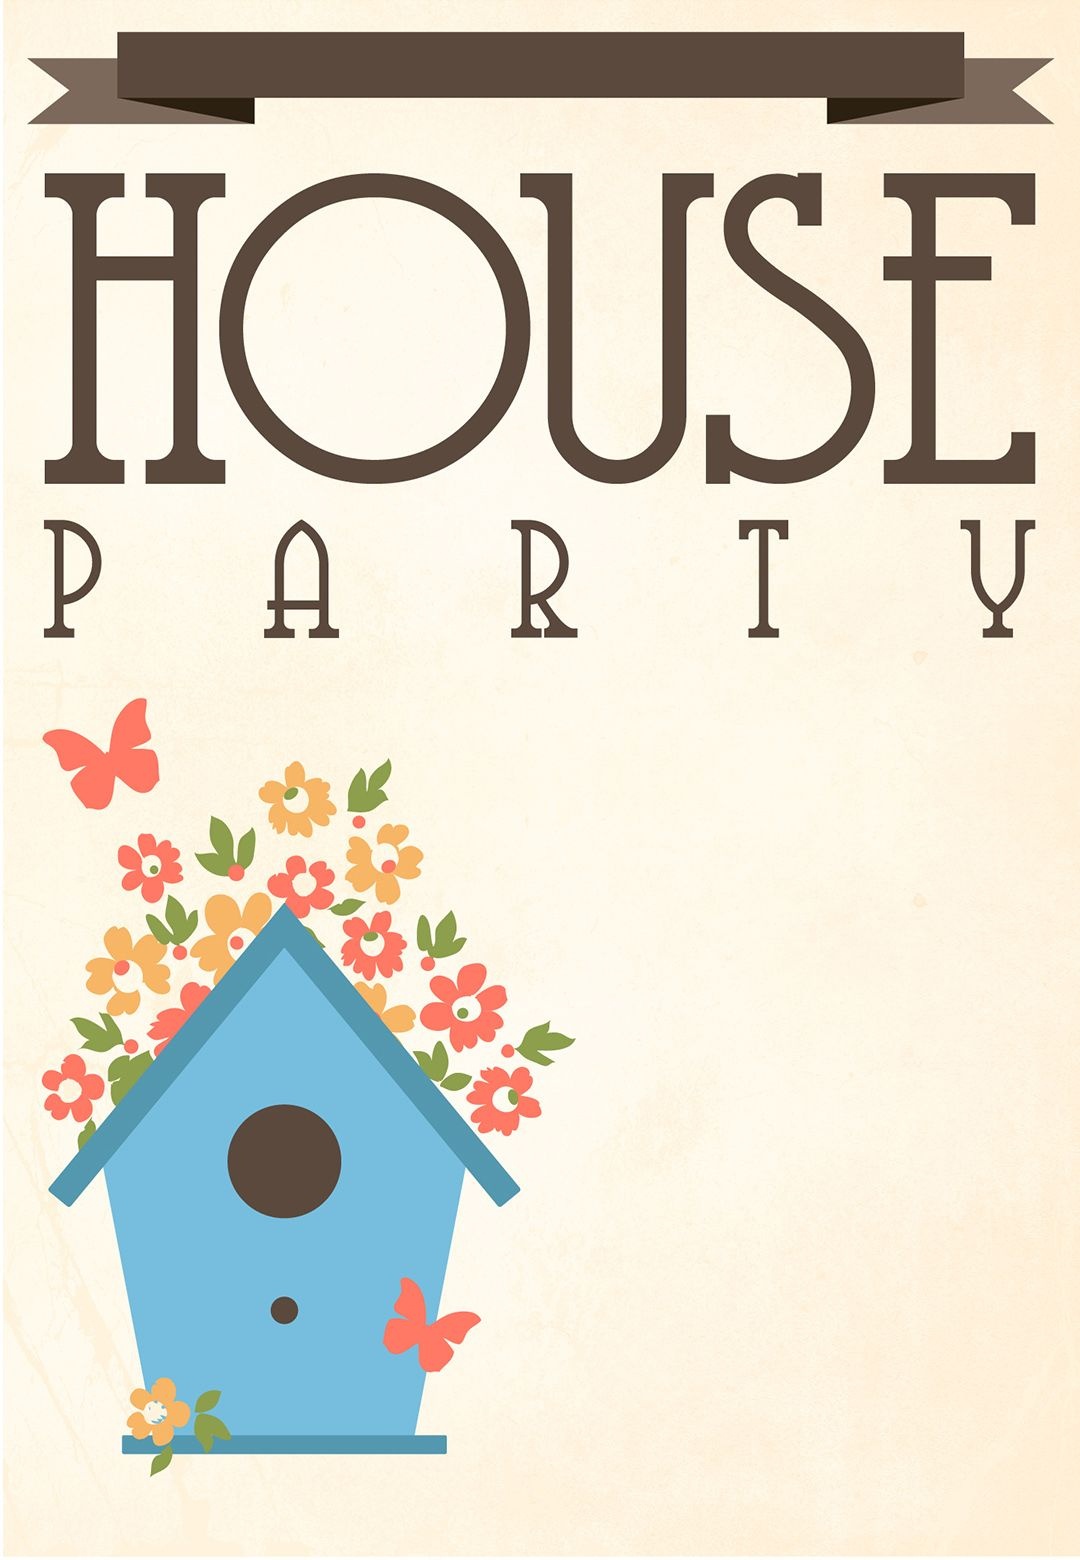 Free Printable House Party Invitation | Fonts/printables/templates - Free Printable Housewarming Invitations Cards